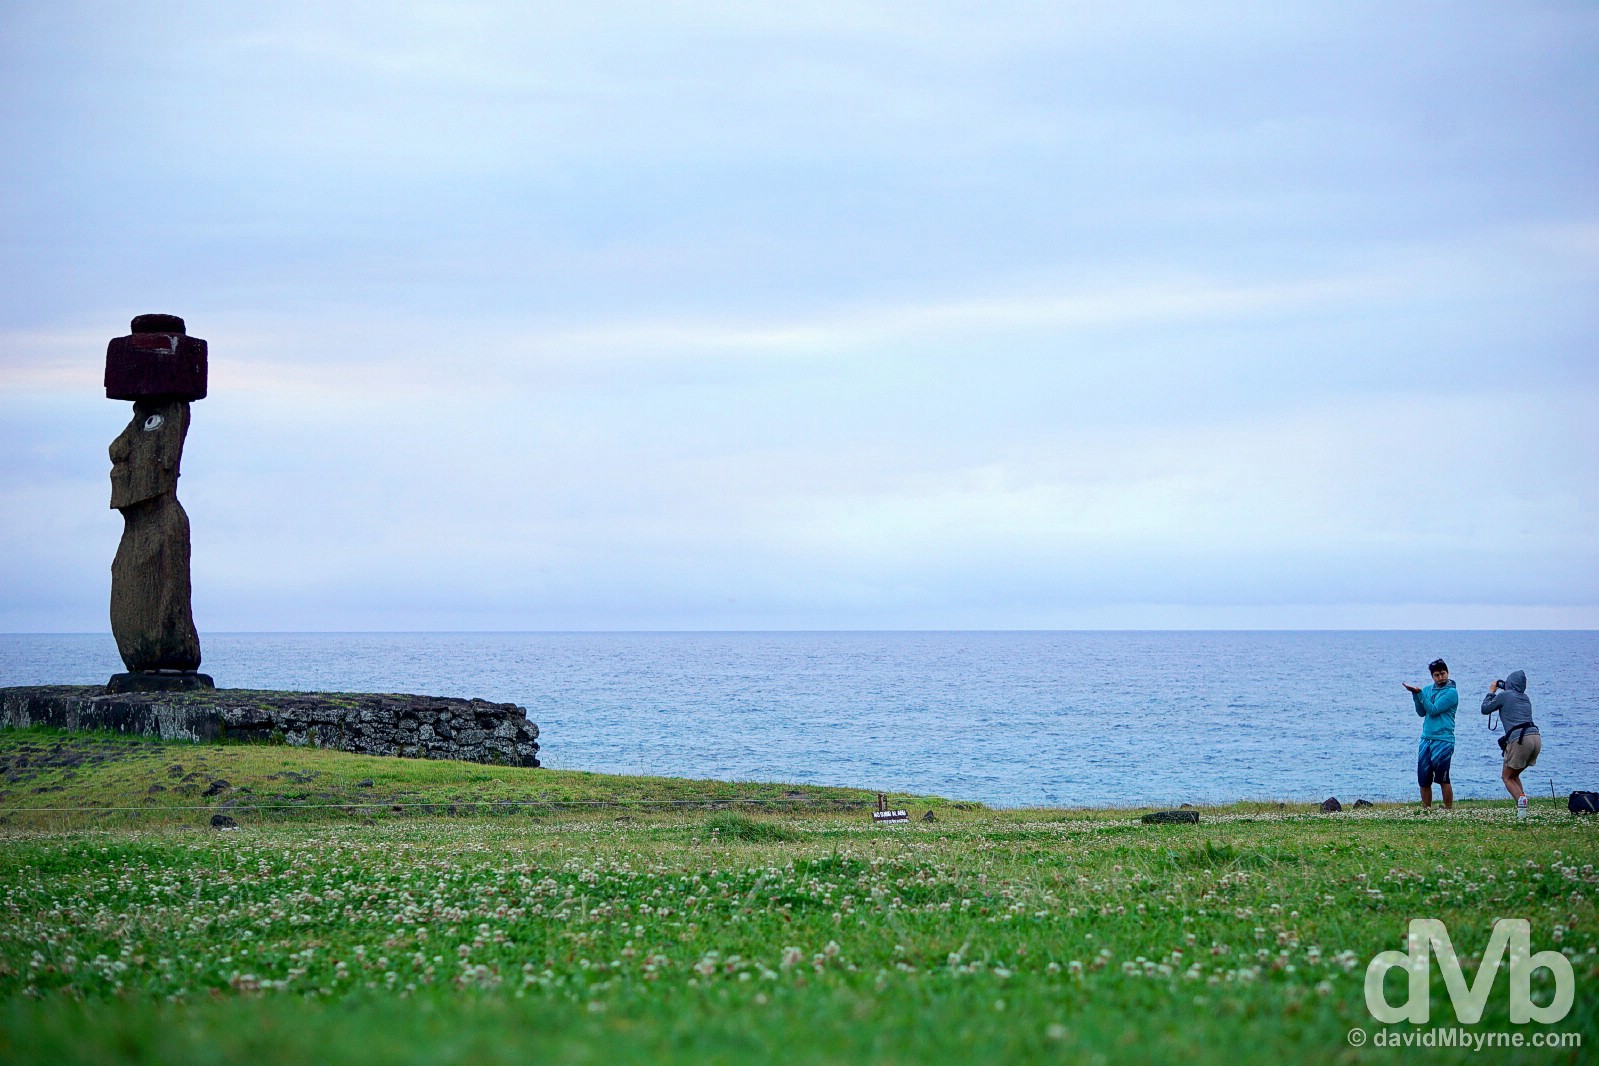 Dusk pictures at Tahai on Easter Island, Chile. September 27, 2015.